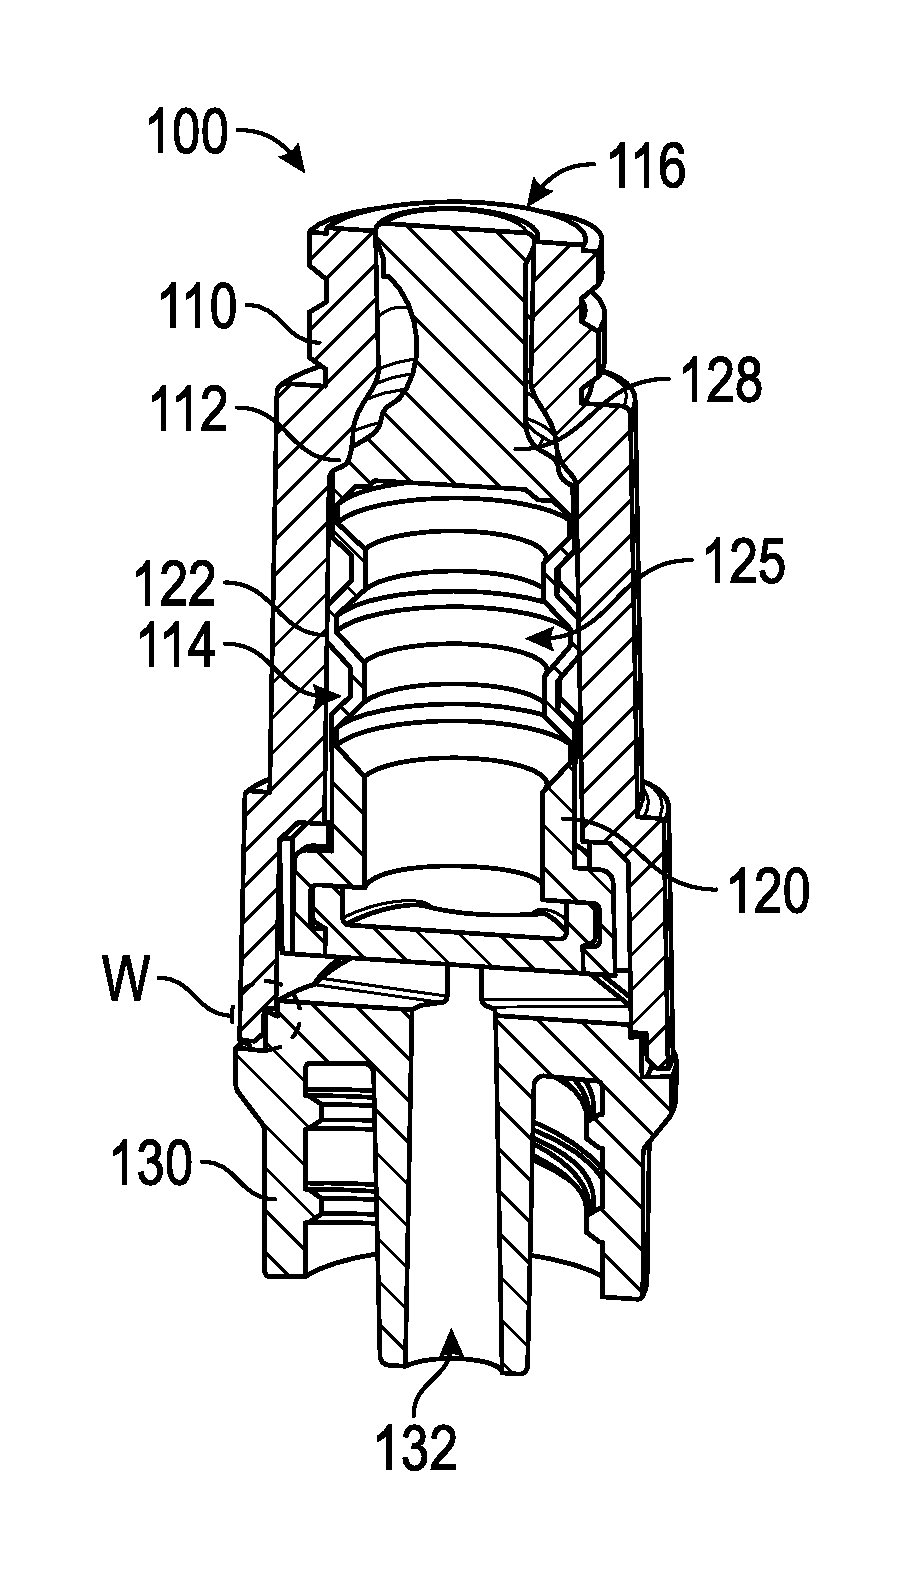 Needleless connector with a tortuous fluid flow path